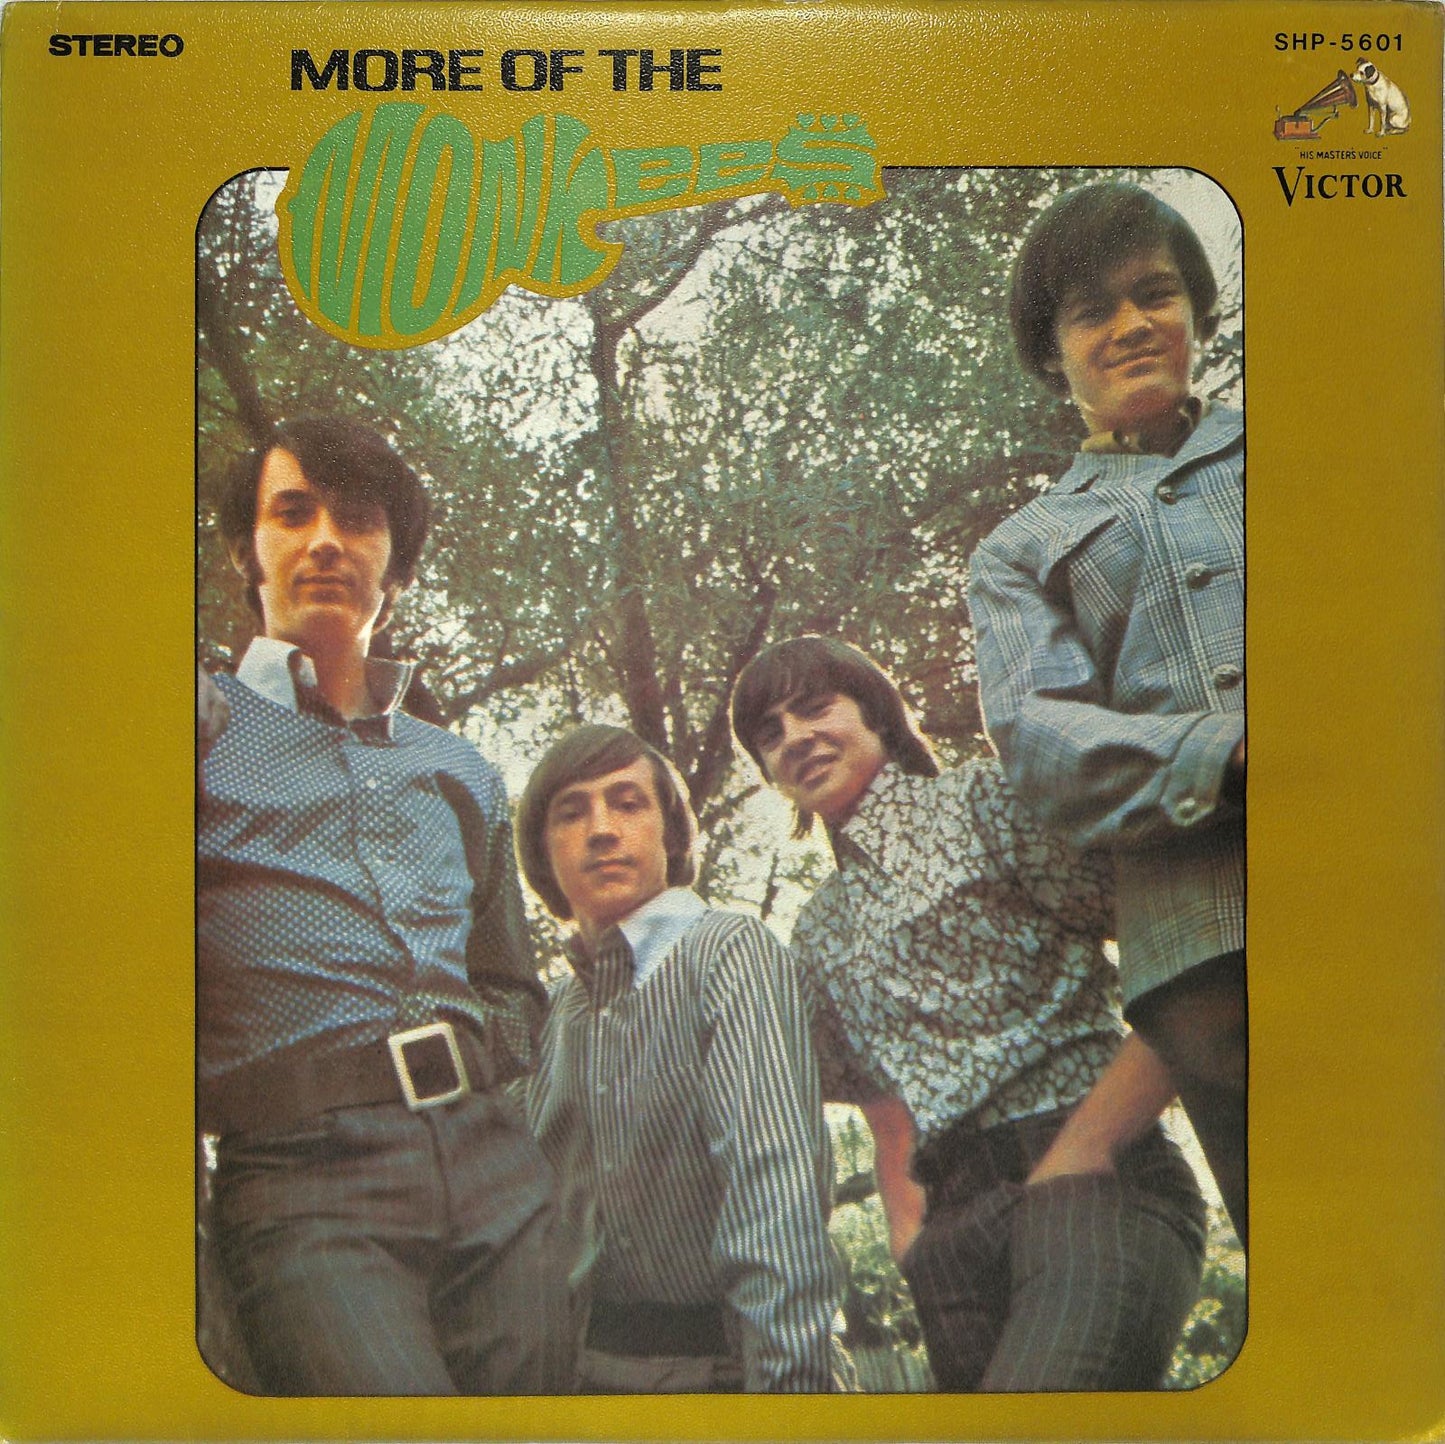 THE MONKEES - More Of The Monkees